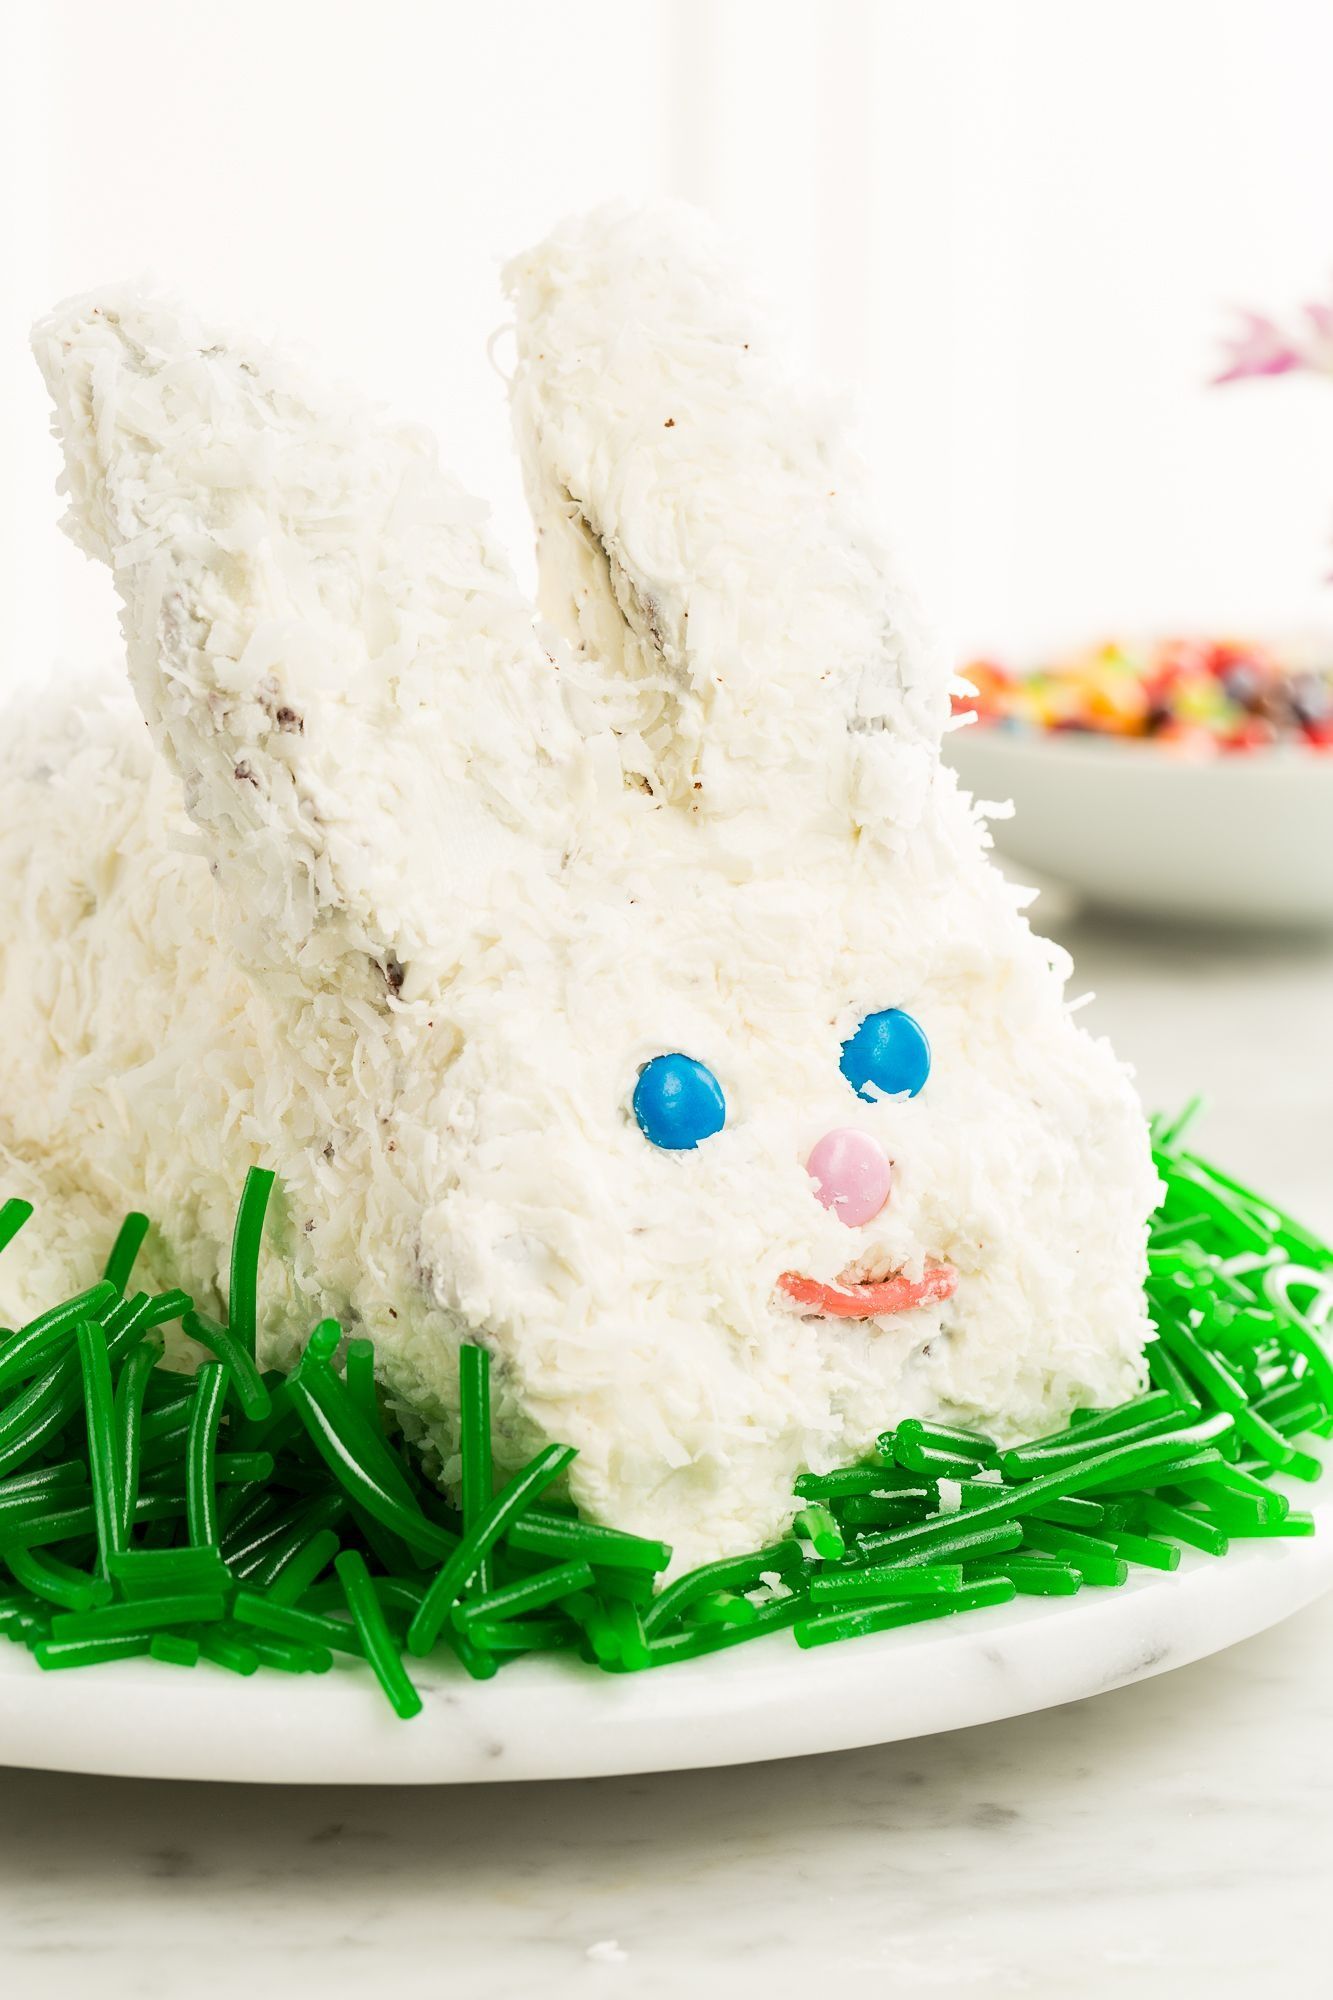 EASIEST Easter Bunny Cake Recipe - Simple and Festive!!